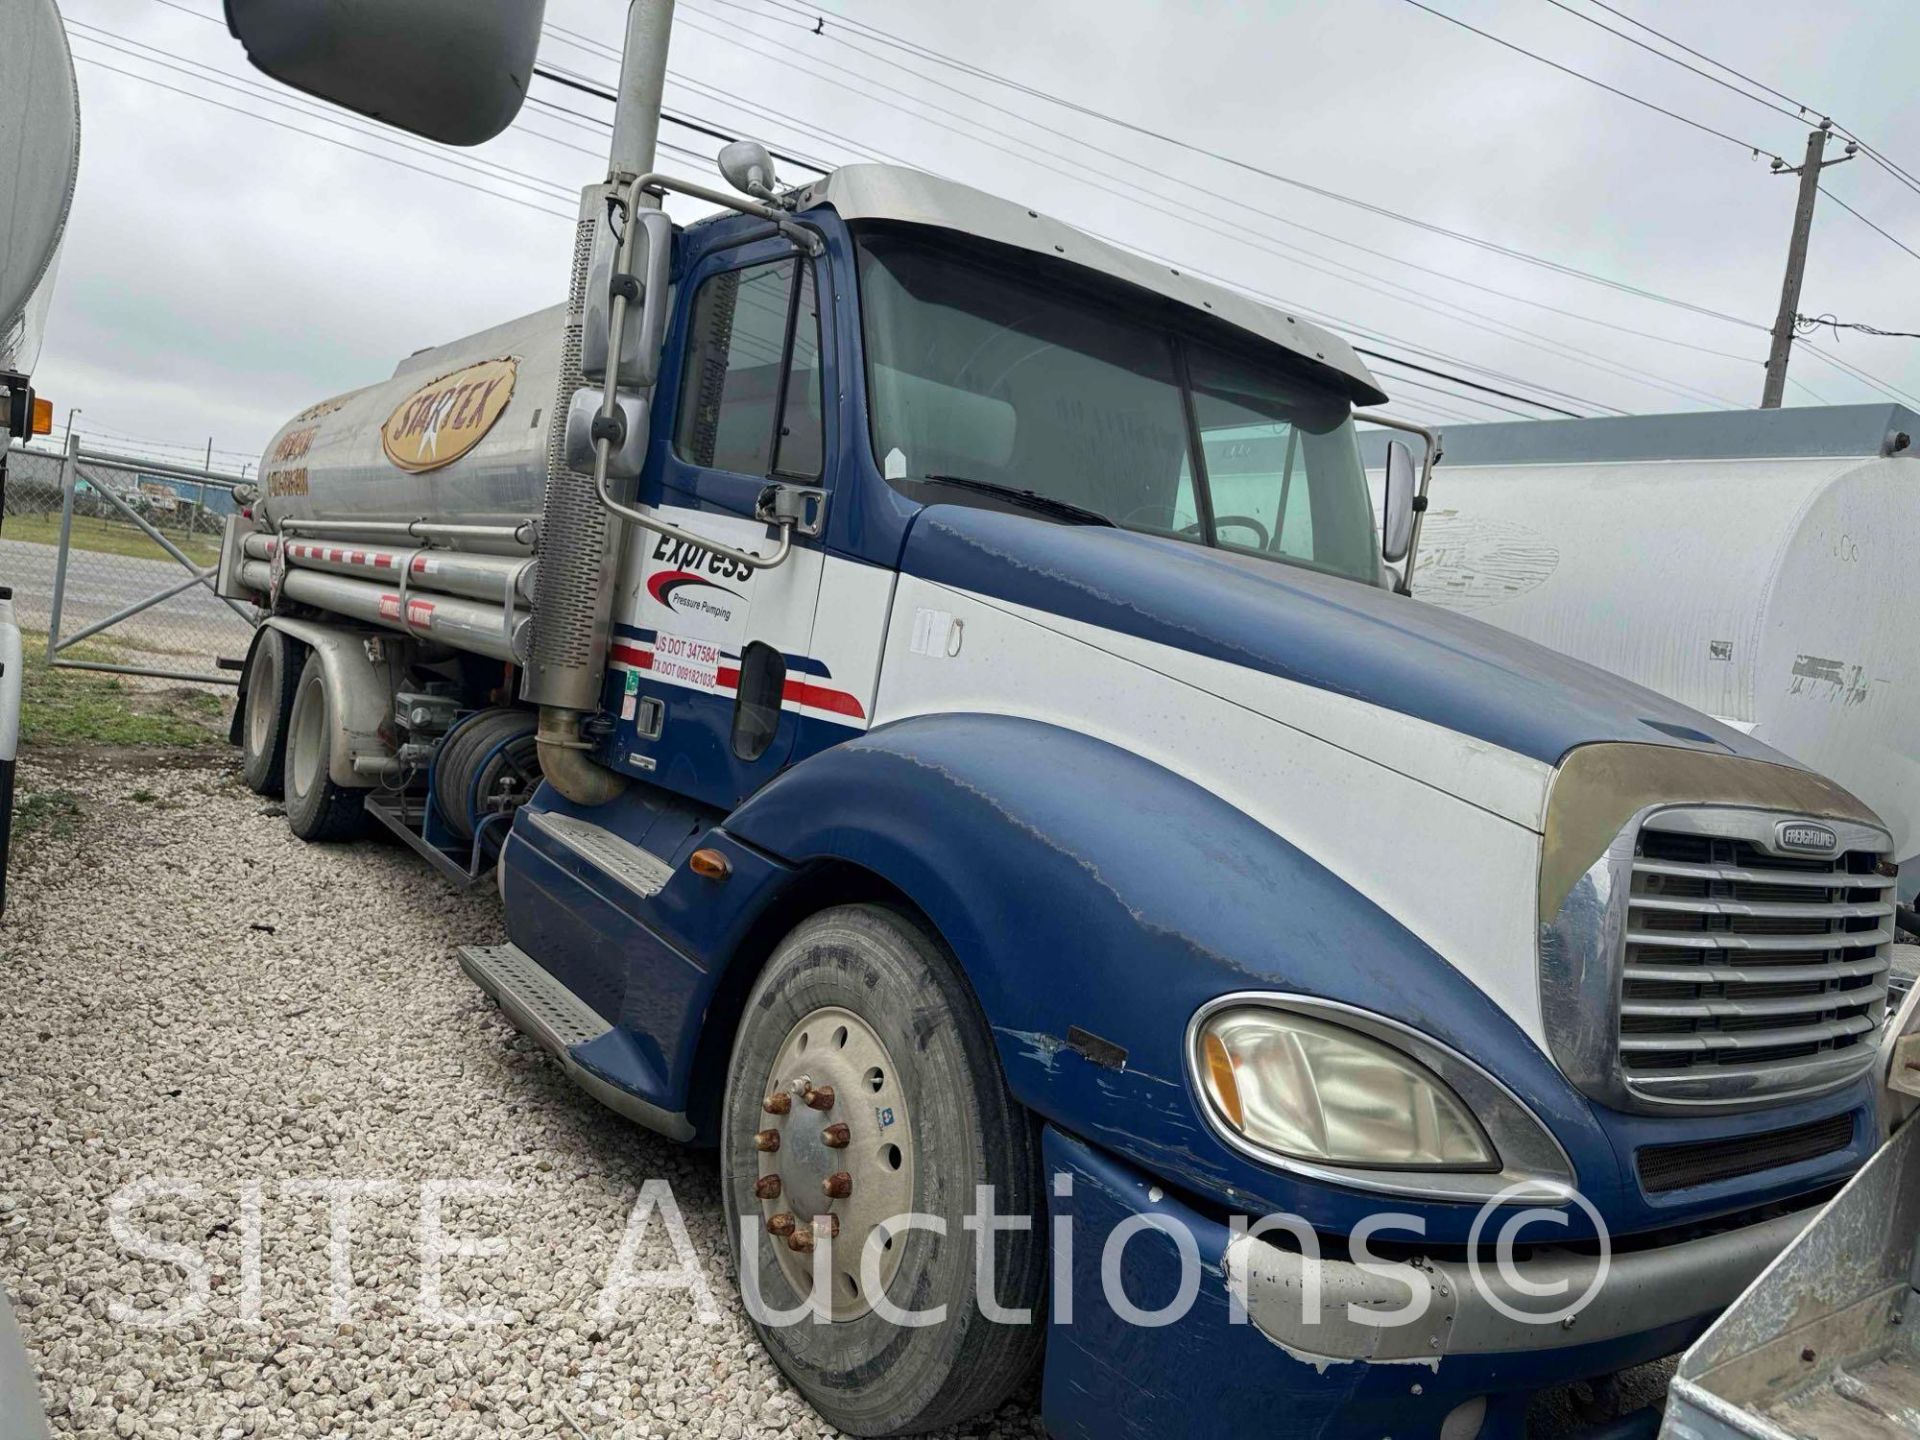 2004 Freightliner Columbia T/A Fuel Truck - Image 2 of 36